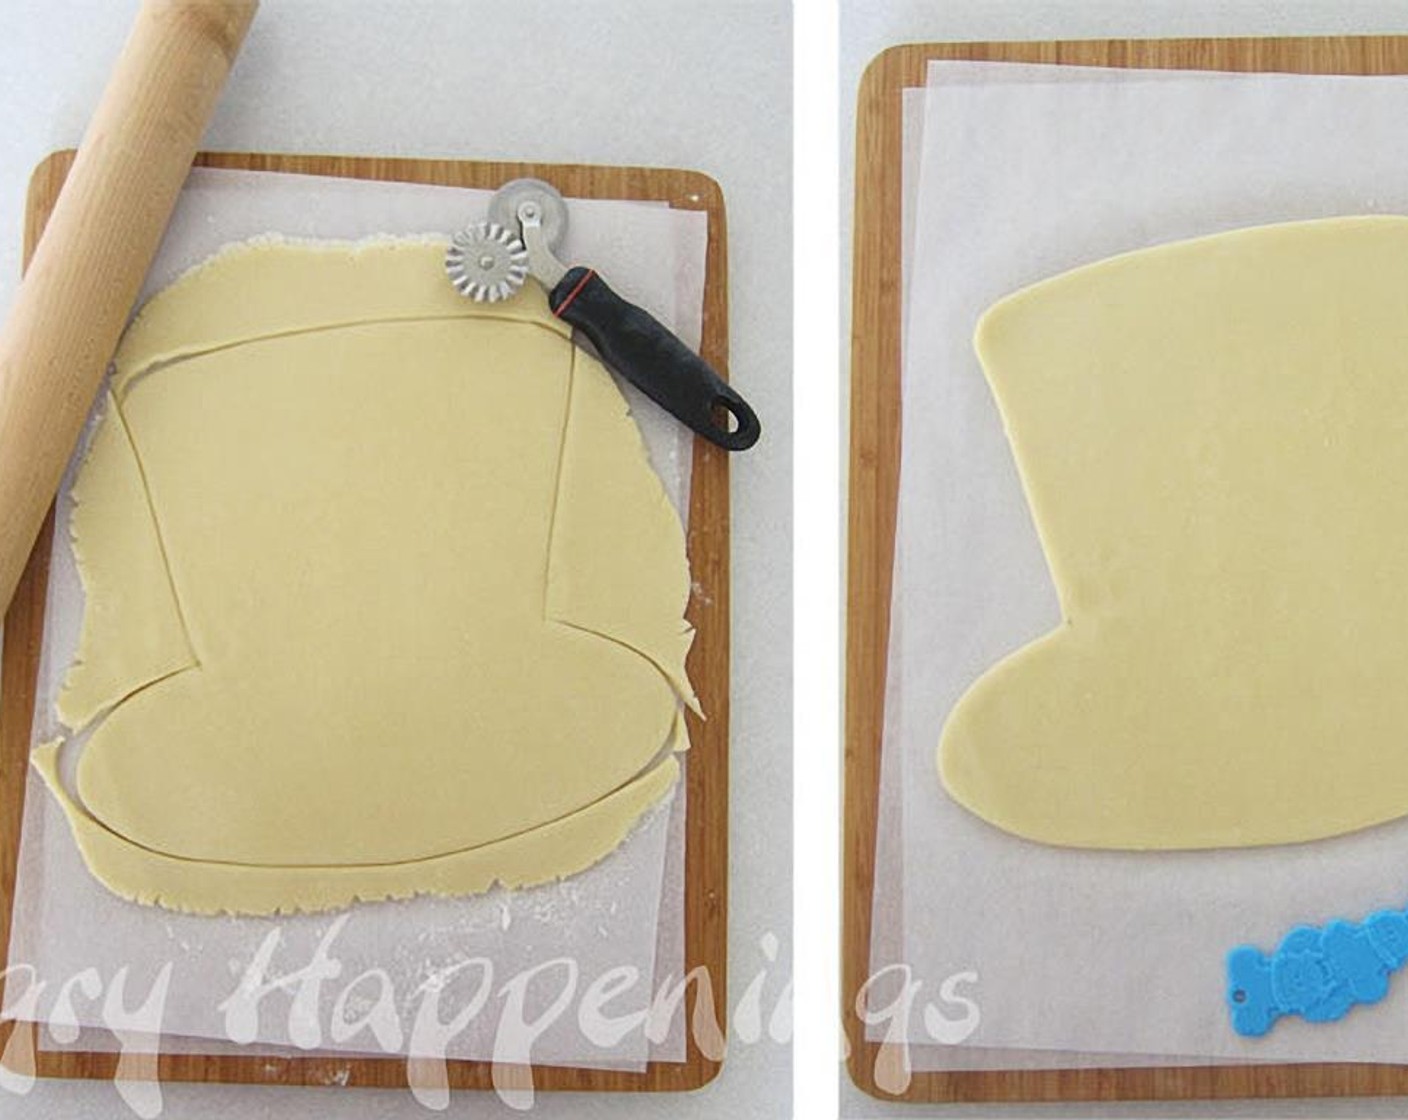 step 2 Line a cutting board with parchment paper. Dust the paper lightly with flour. Unwrap dough and set on parchment paper. Roll out to 3/8-inch thickness. Use a pizza wheel or knife to cut out a hat shape. Refrigerate for 30 minutes.